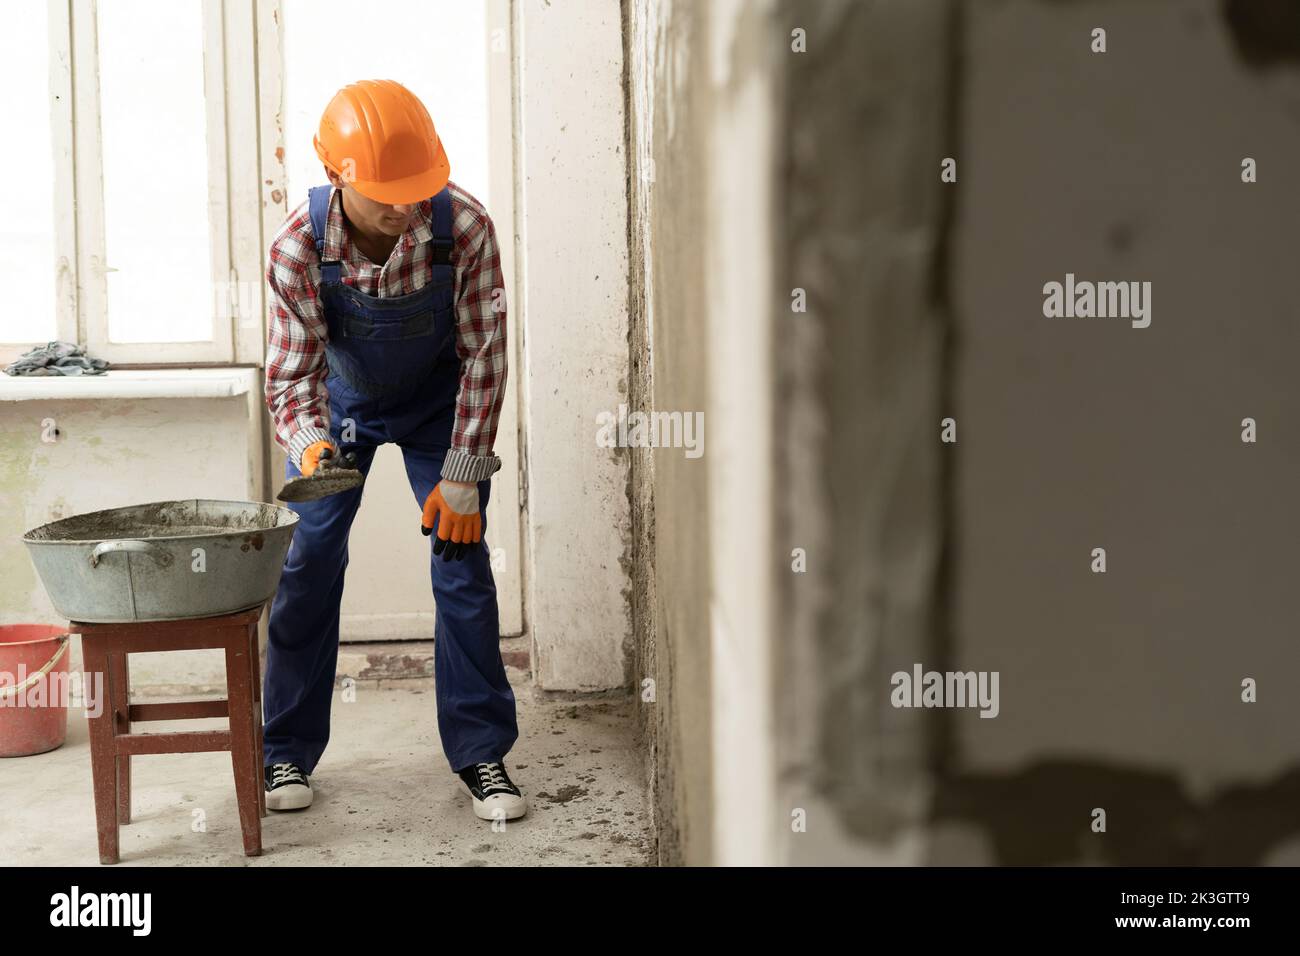 Man builder plasterer using trowel to plastering cement wall in home. building construction work and repair concept Stock Photo